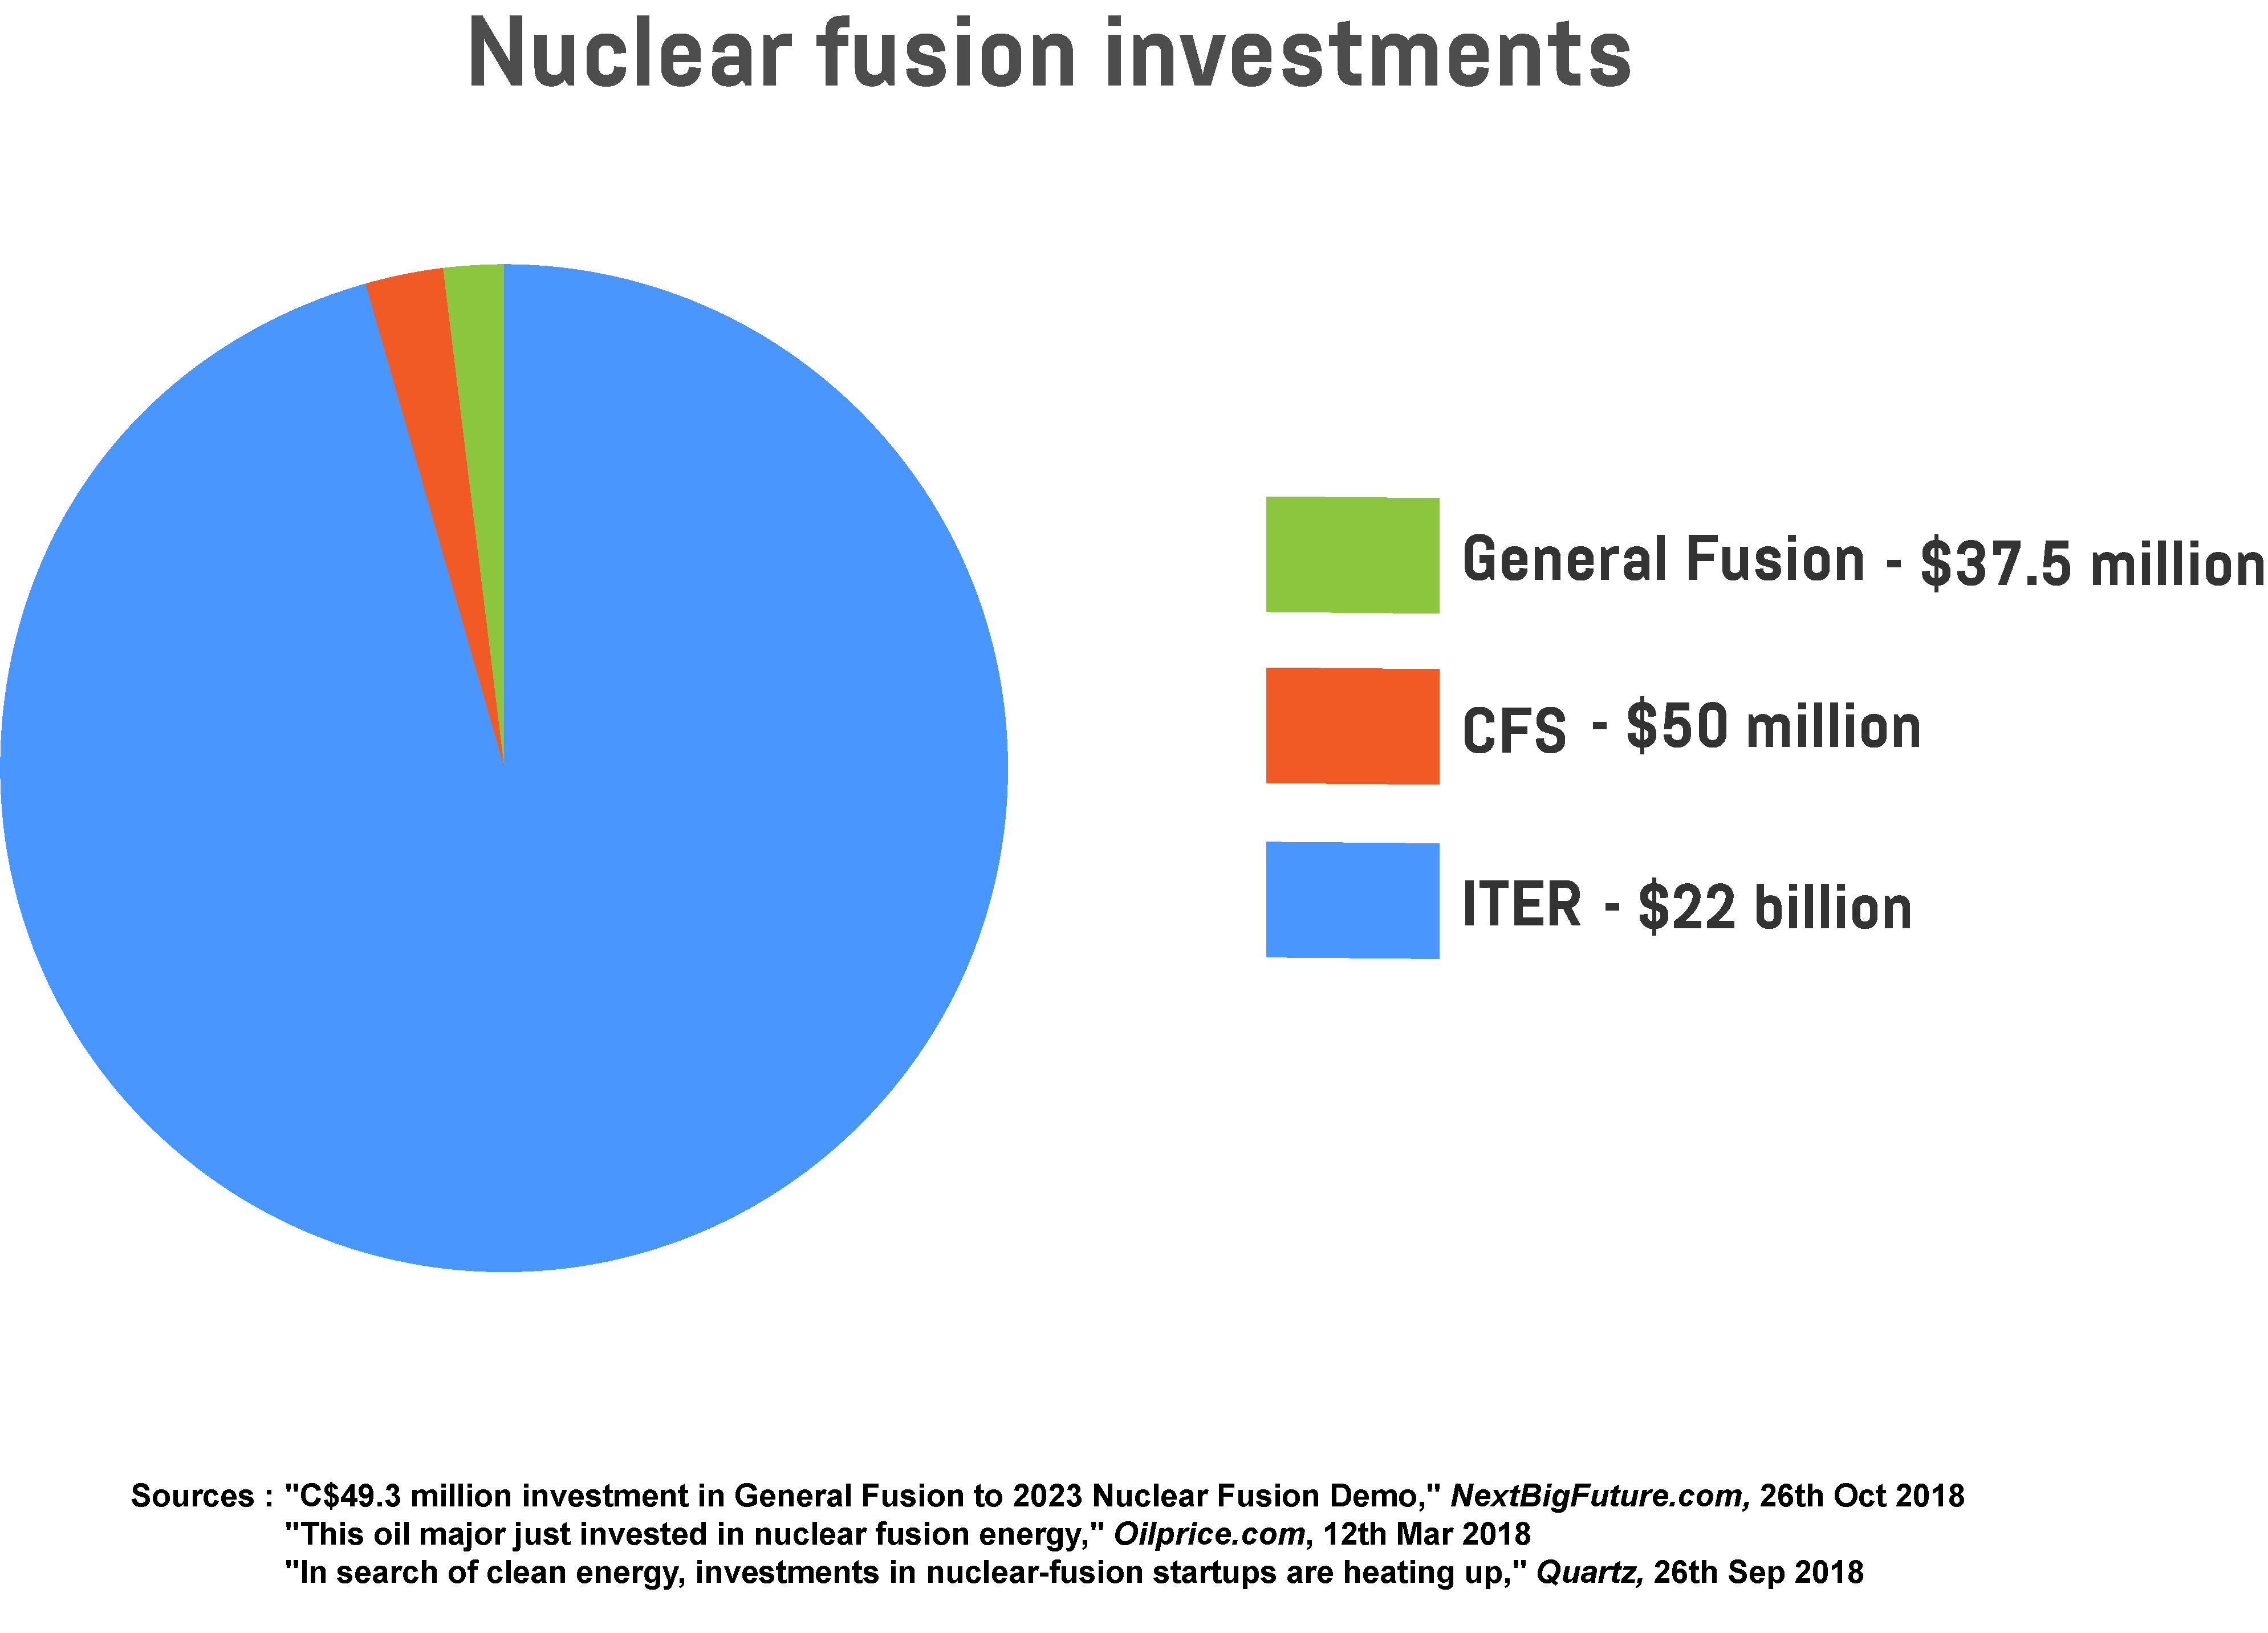  Pie chart showing the value of investments in major nuclear fusion projects.